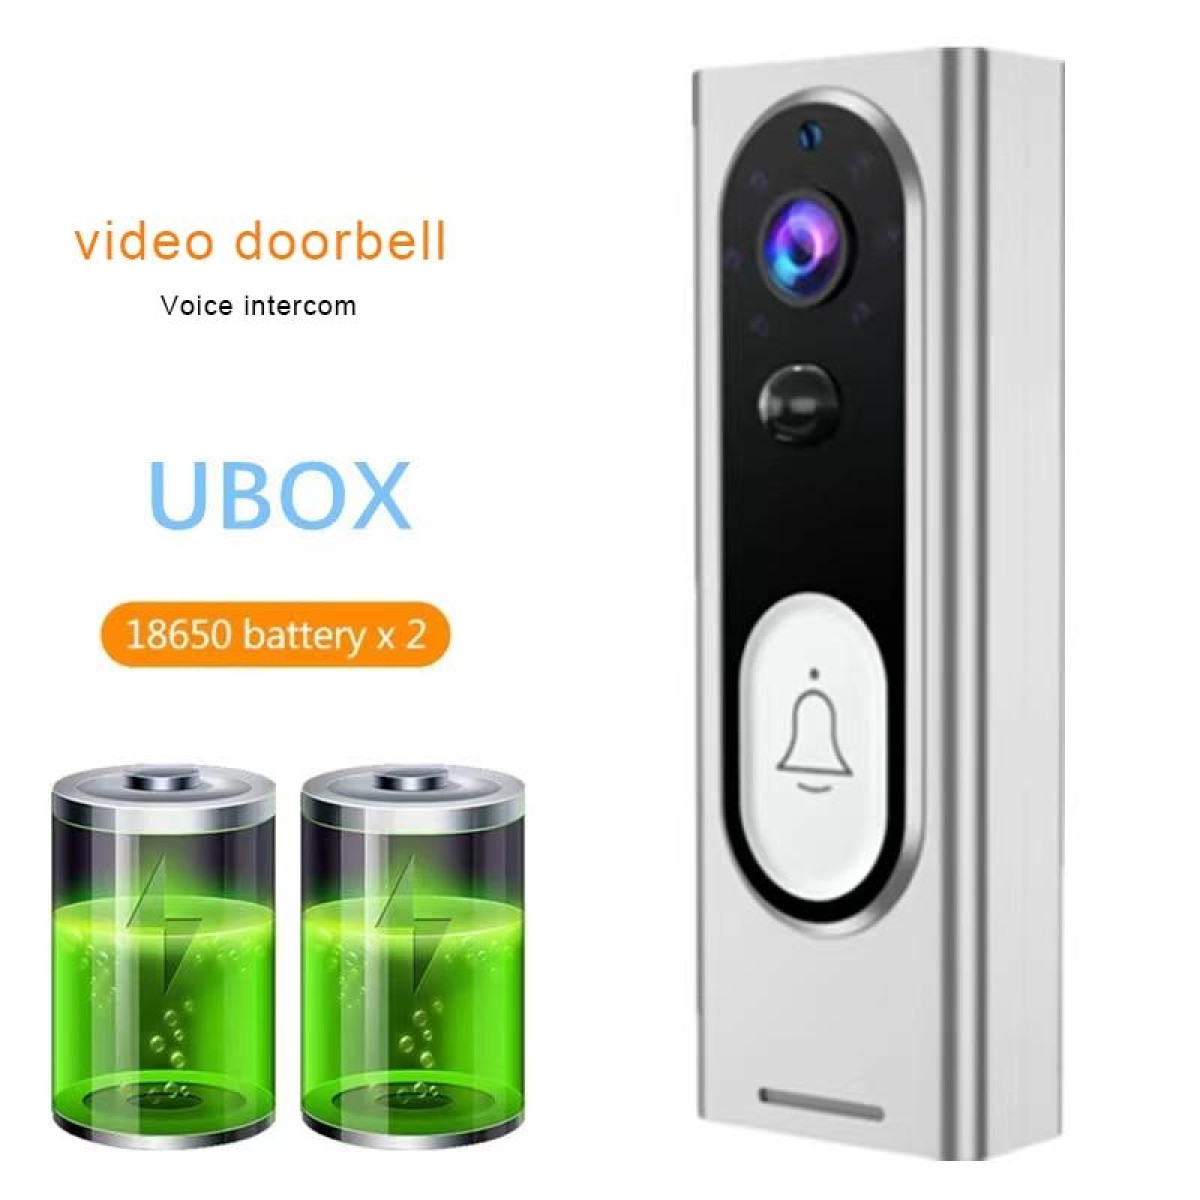 M13 Wireless Intelligent Video Doorbell Support Two-way Voice, Infrared Night Vision, Motion detection(Black)